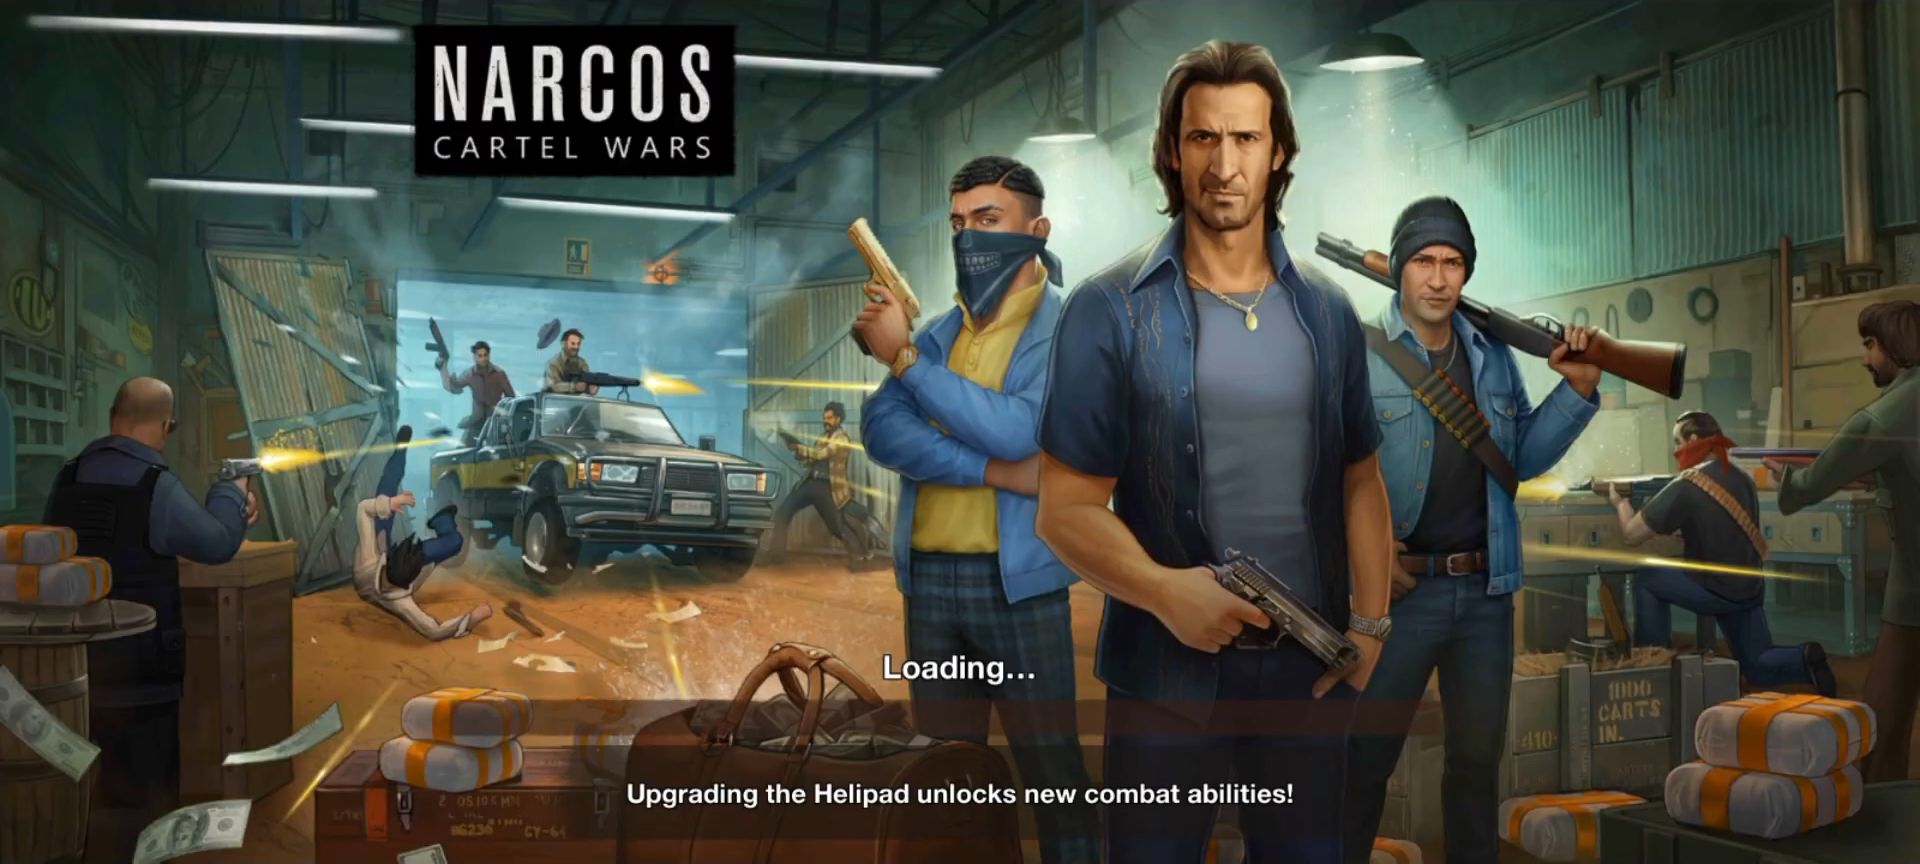 Scarica Narcos: Cartel Wars Unlimited gratis per Android.